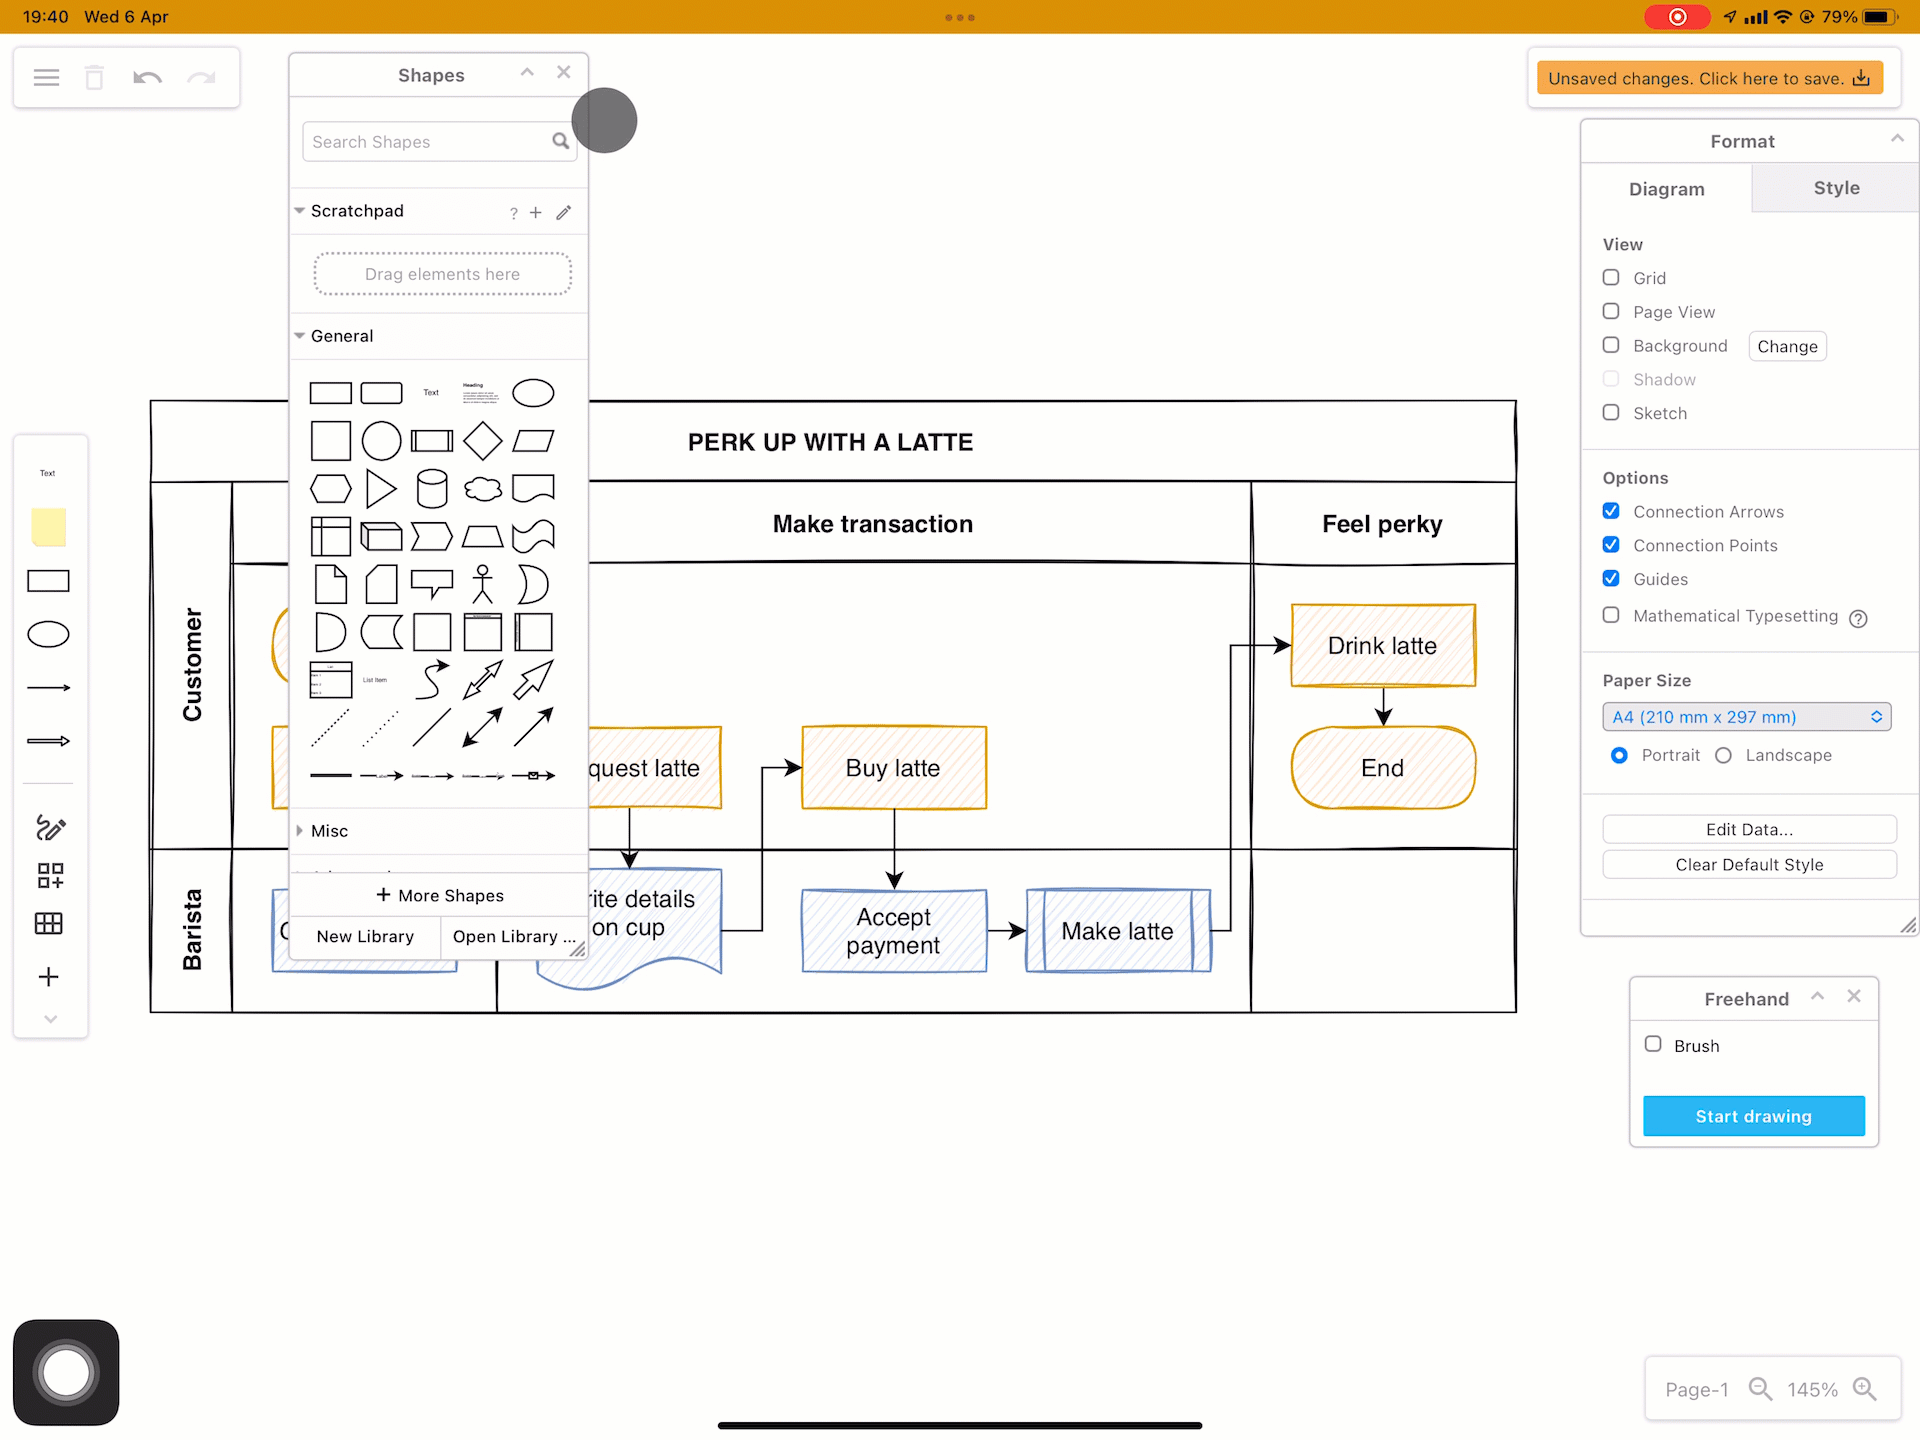 Move the floating panels around the drawing canvas and minimise them for more space when using draw.io on a tablet